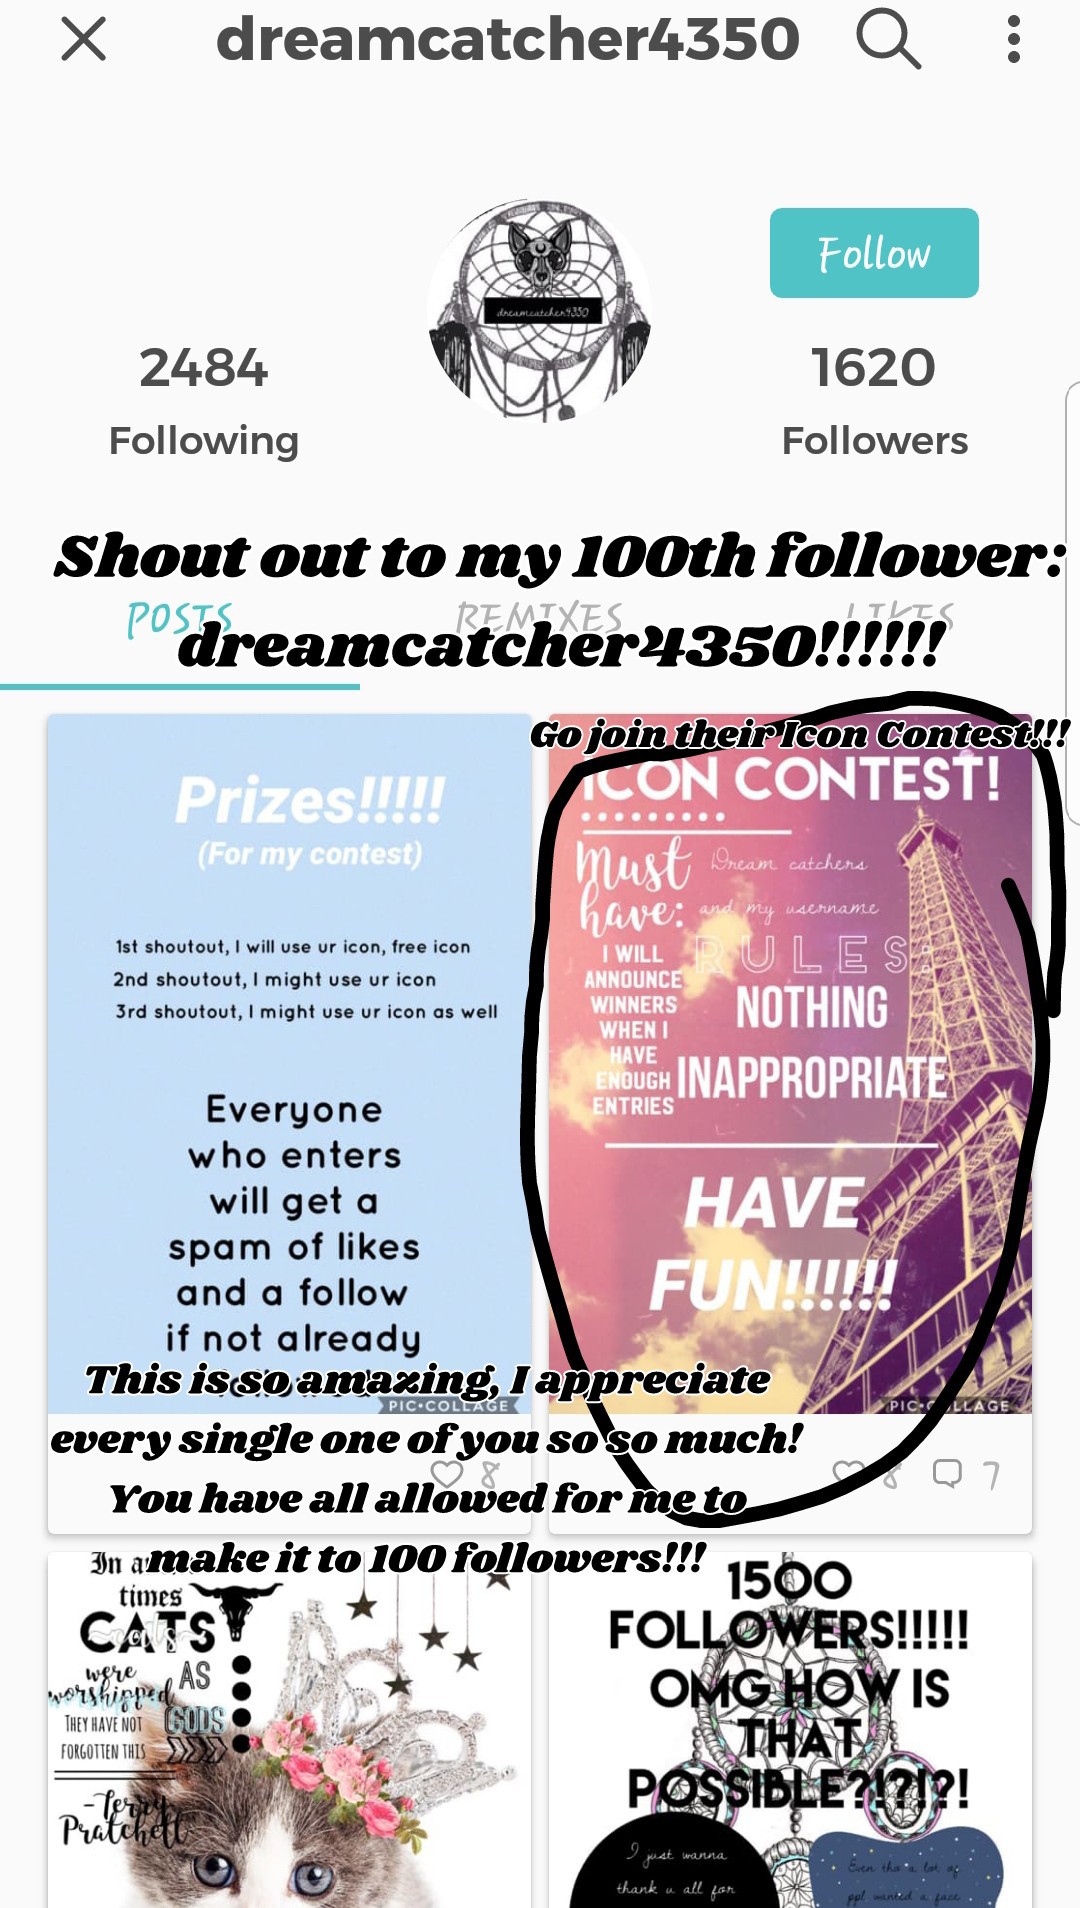 CHECK OUT DREAMCATCHER4350 AND JOIN THEIR ICOM CONTEST!!!!